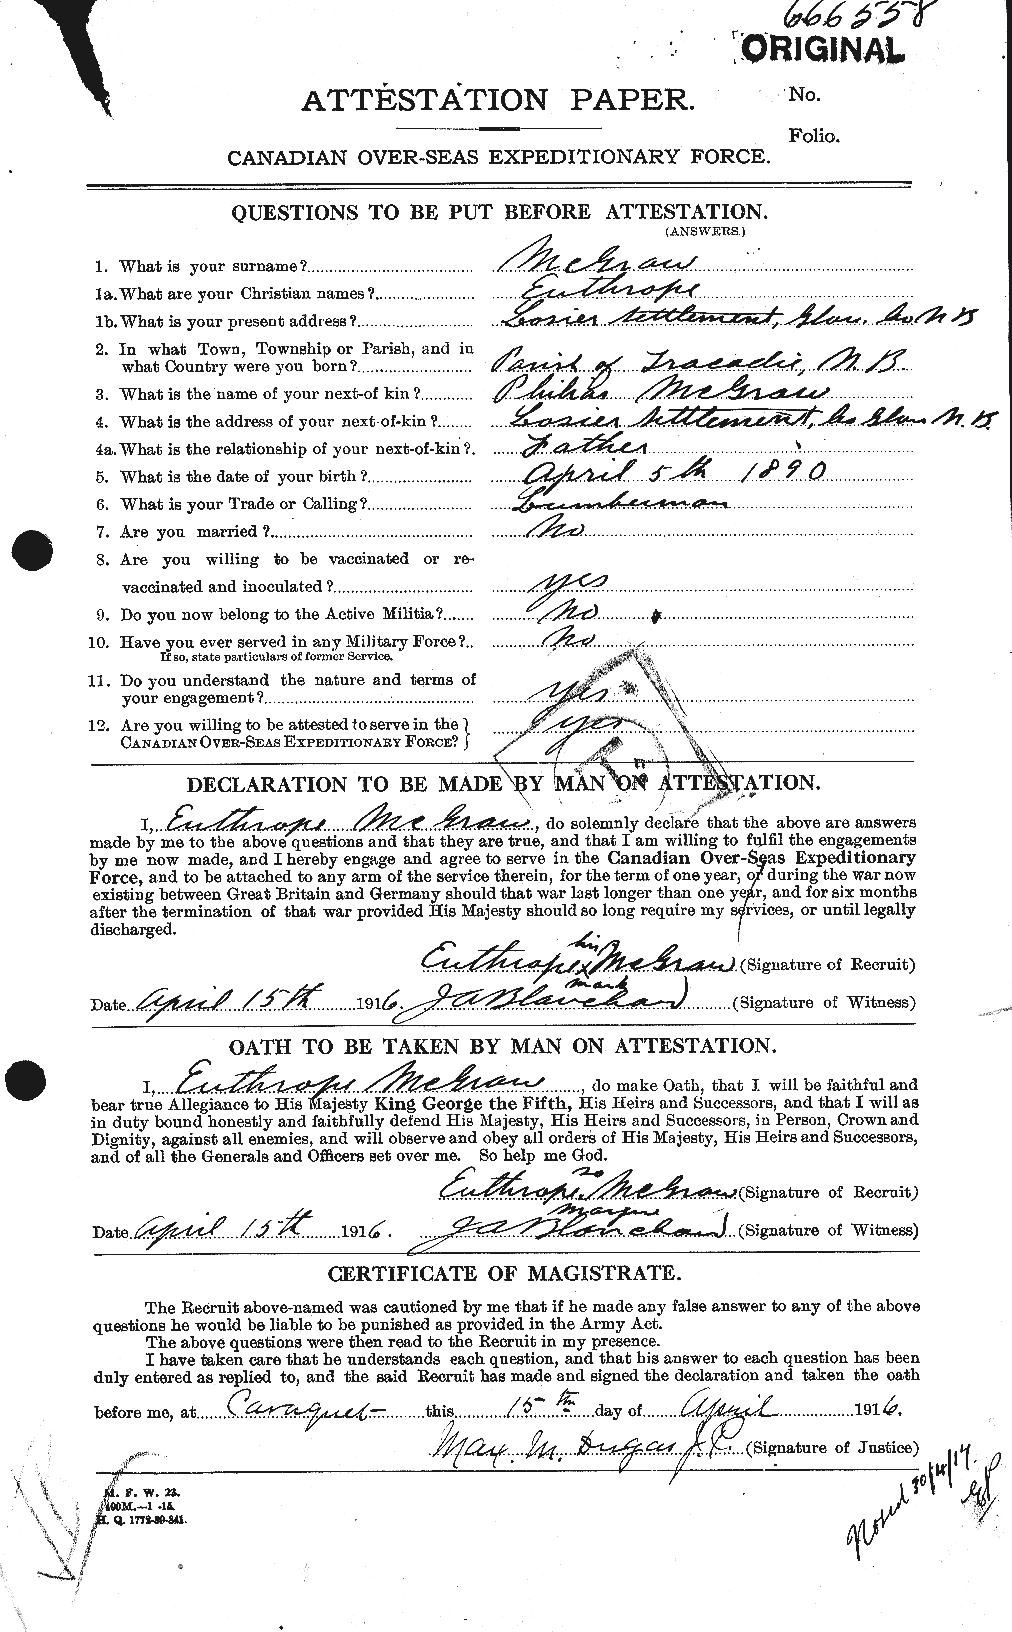 Personnel Records of the First World War - CEF 523724a